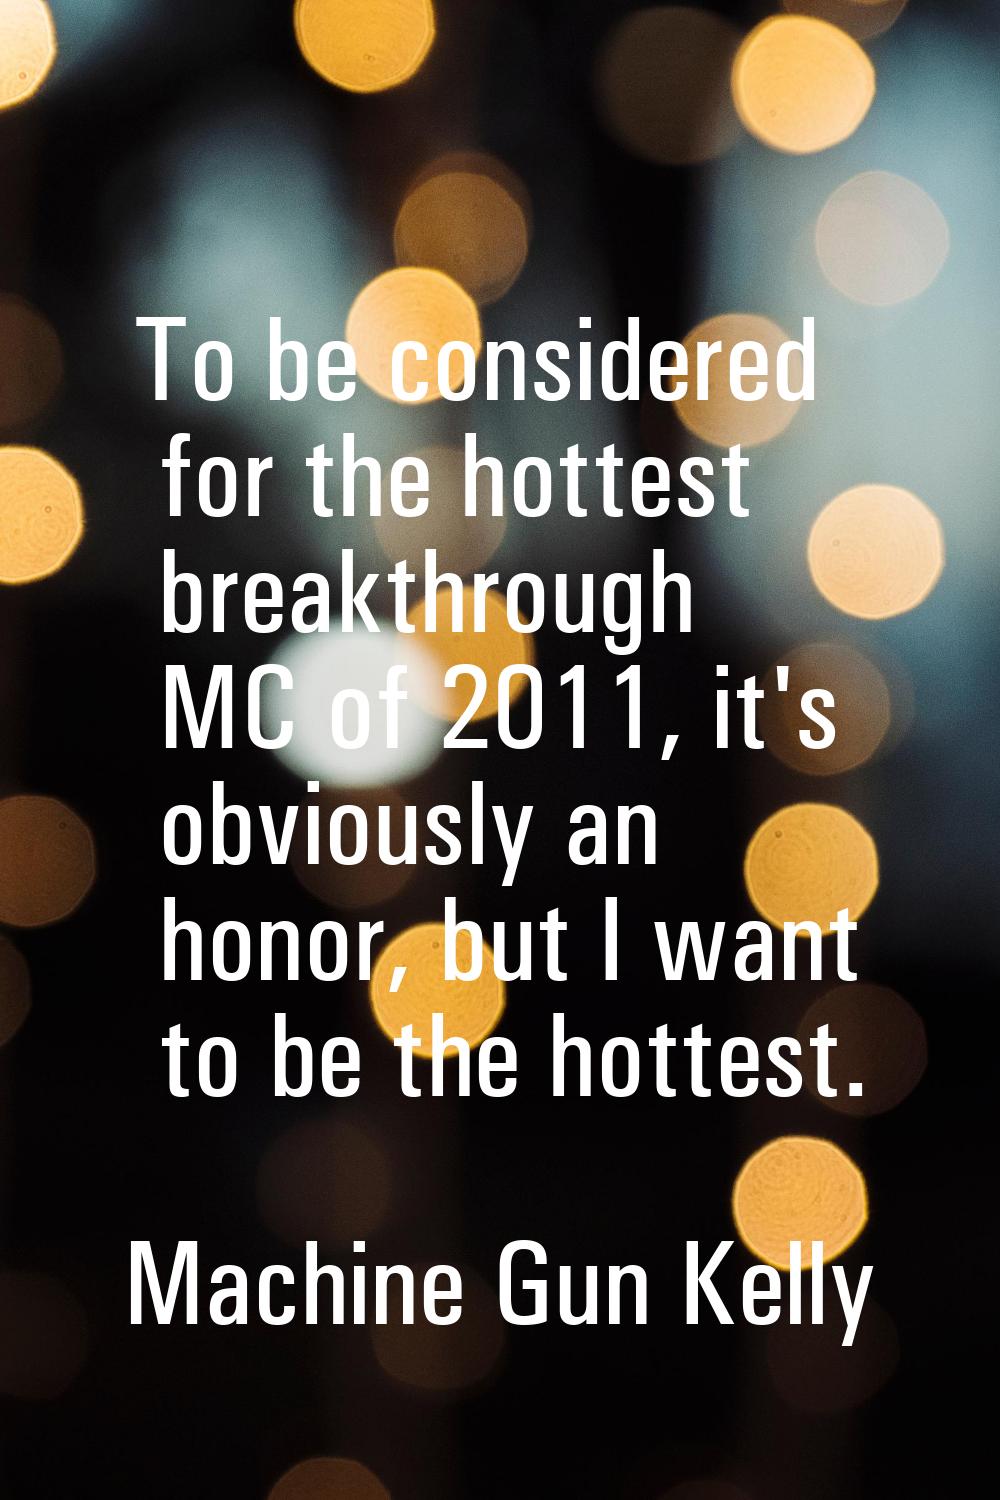 To be considered for the hottest breakthrough MC of 2011, it's obviously an honor, but I want to be